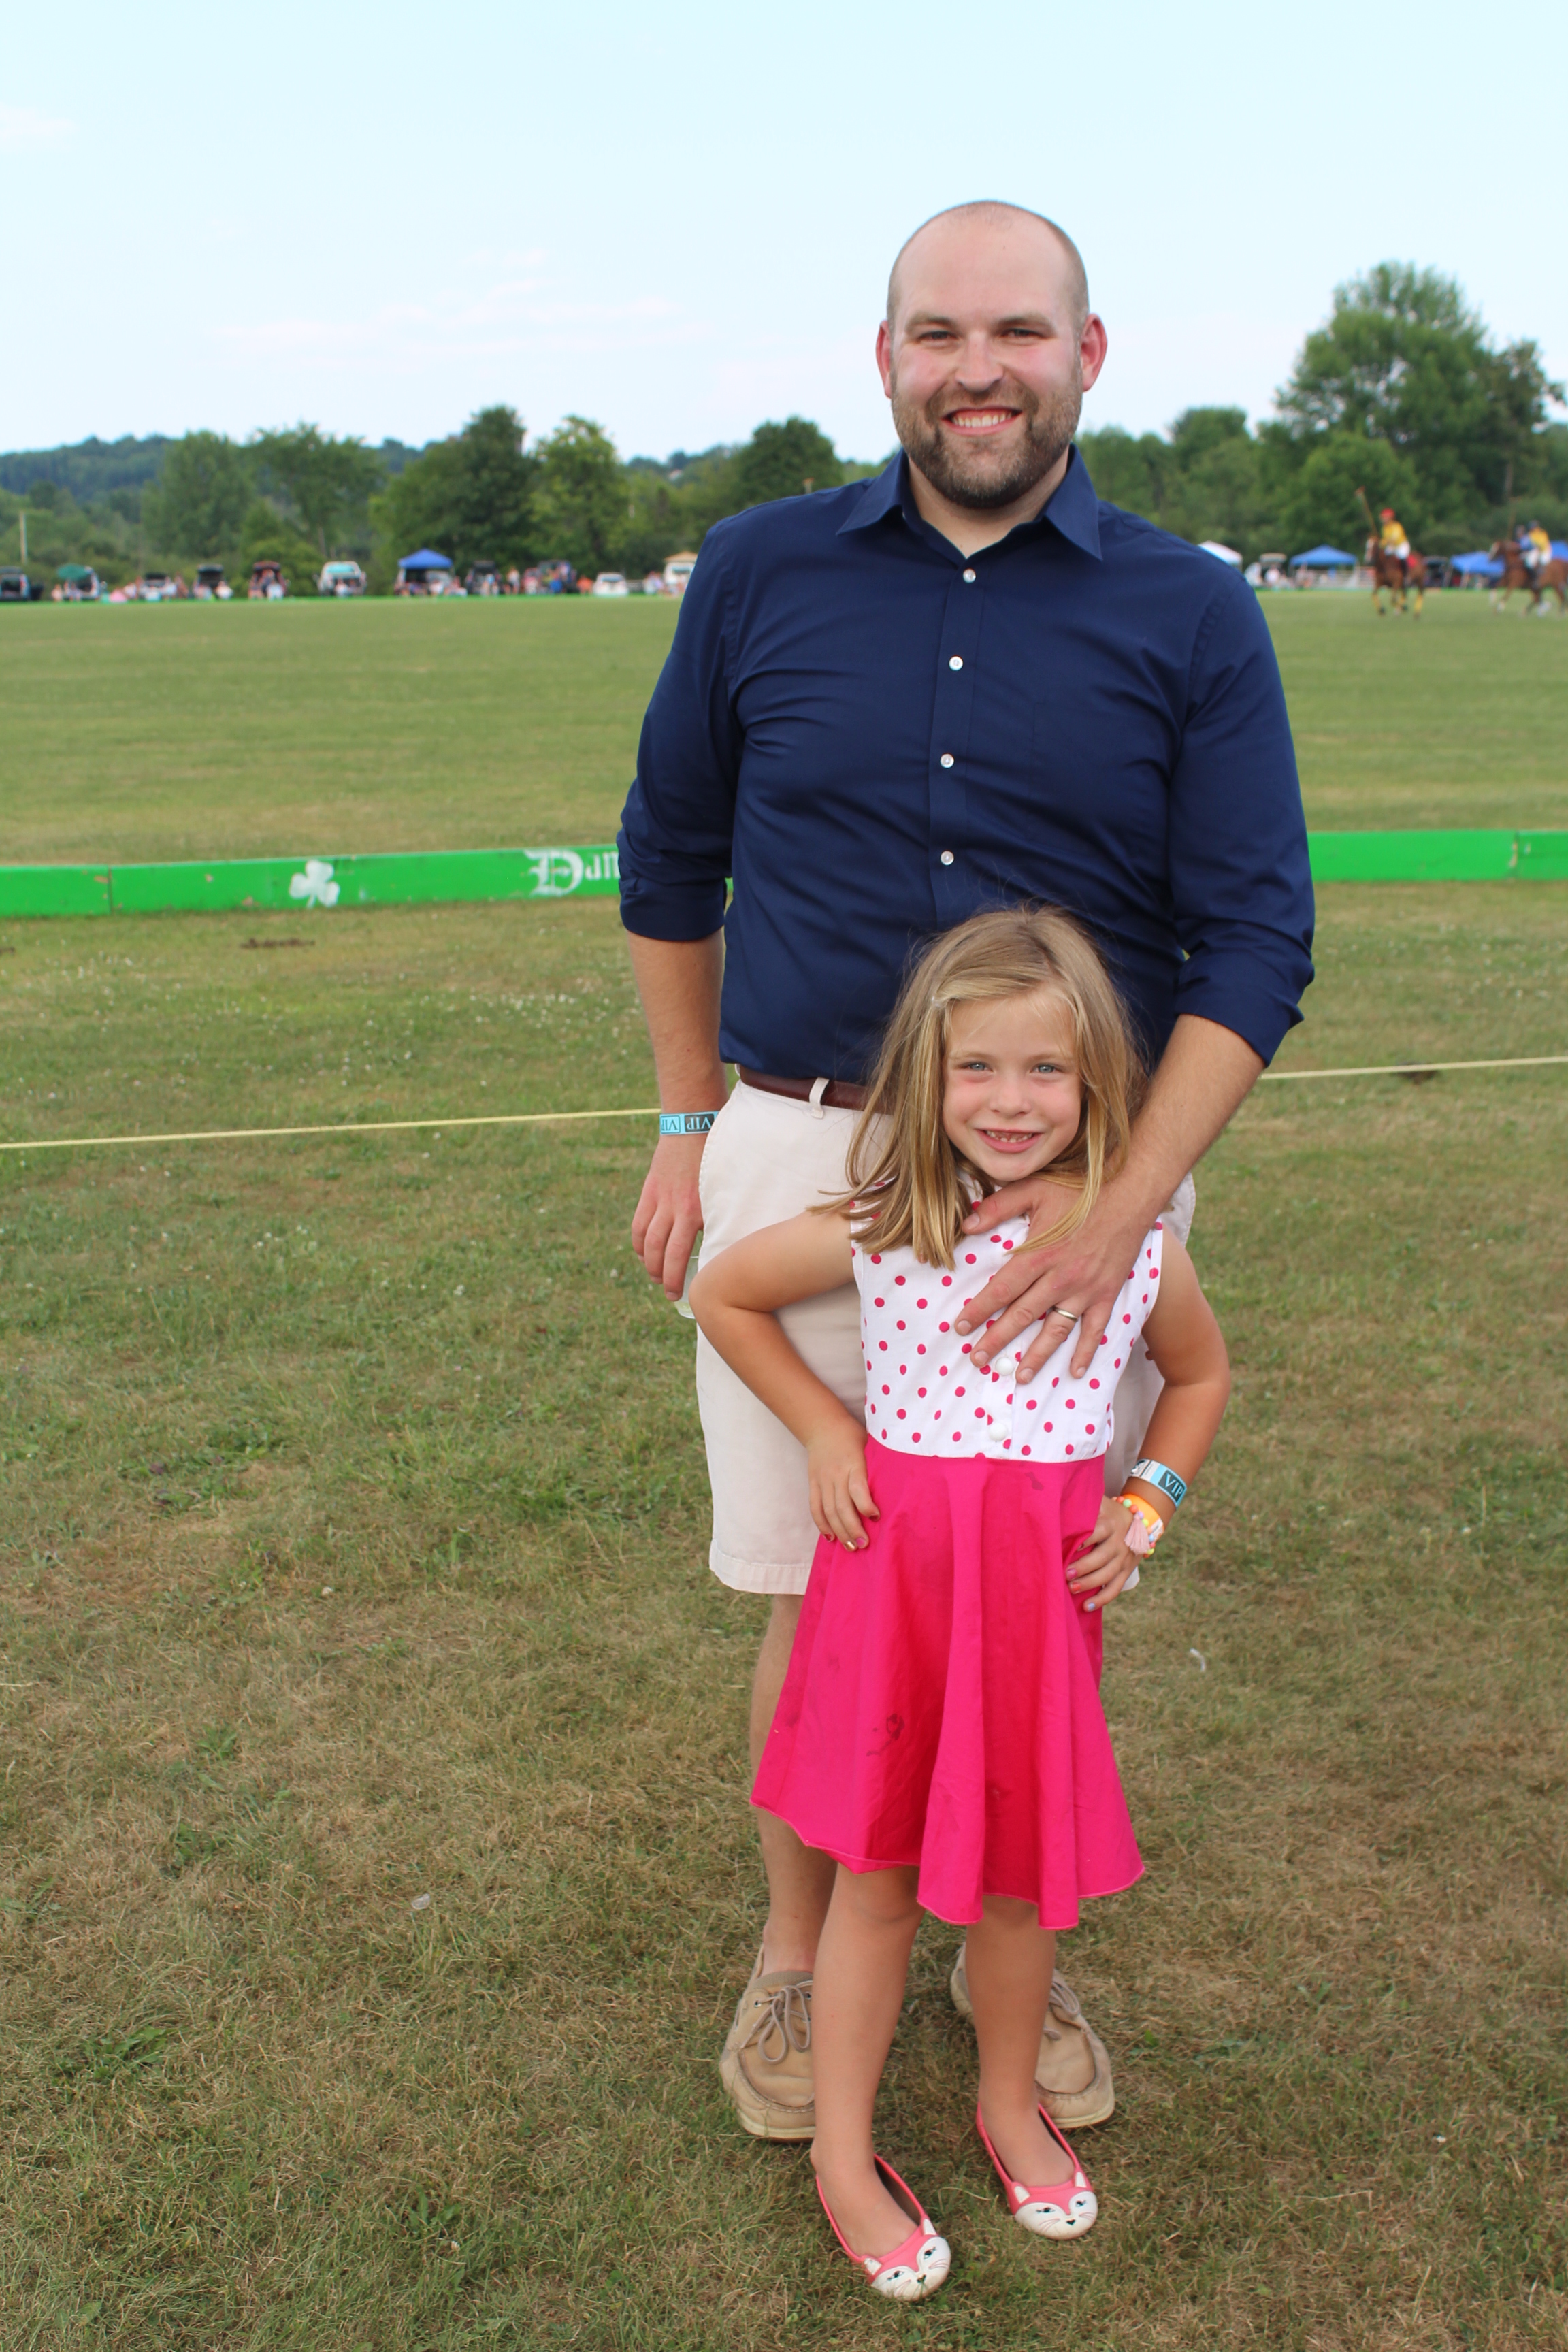 Josh Phelps with daughter at the Saratoga Dog & Pony Show to benefit AIM Services, Inc.